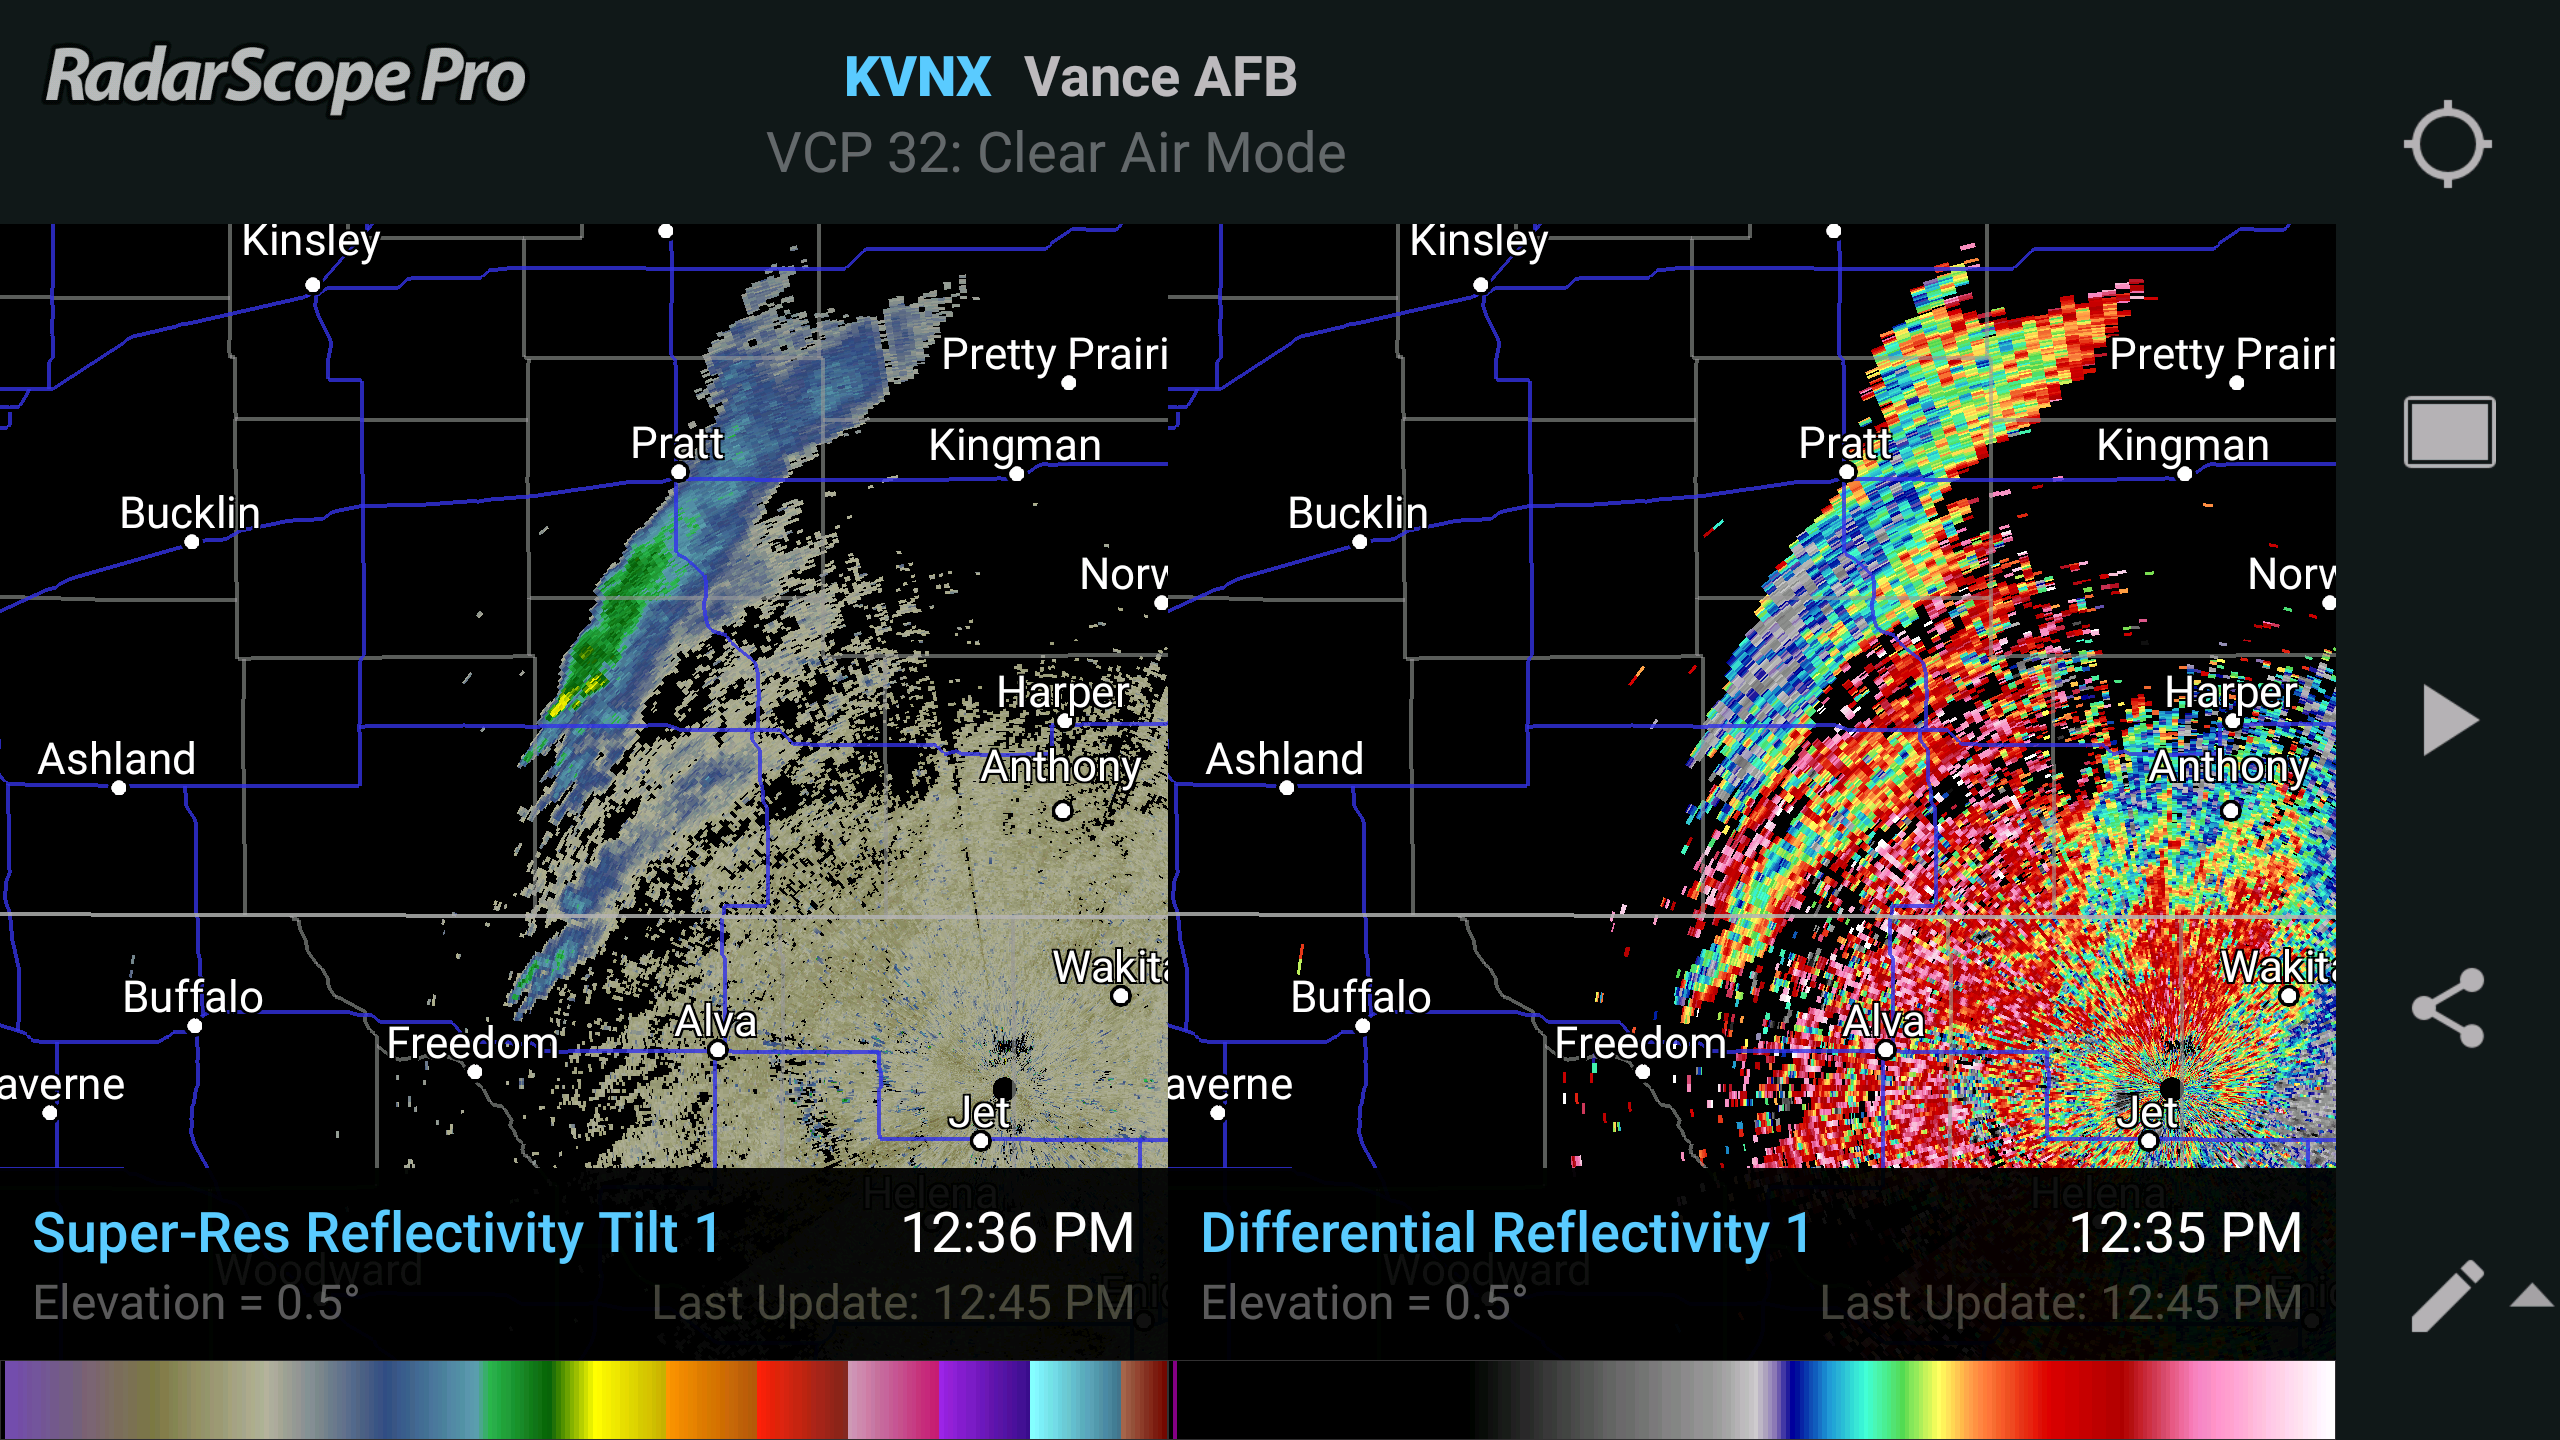 Smoke Plume in Reflectivity and Differential Reflectivity